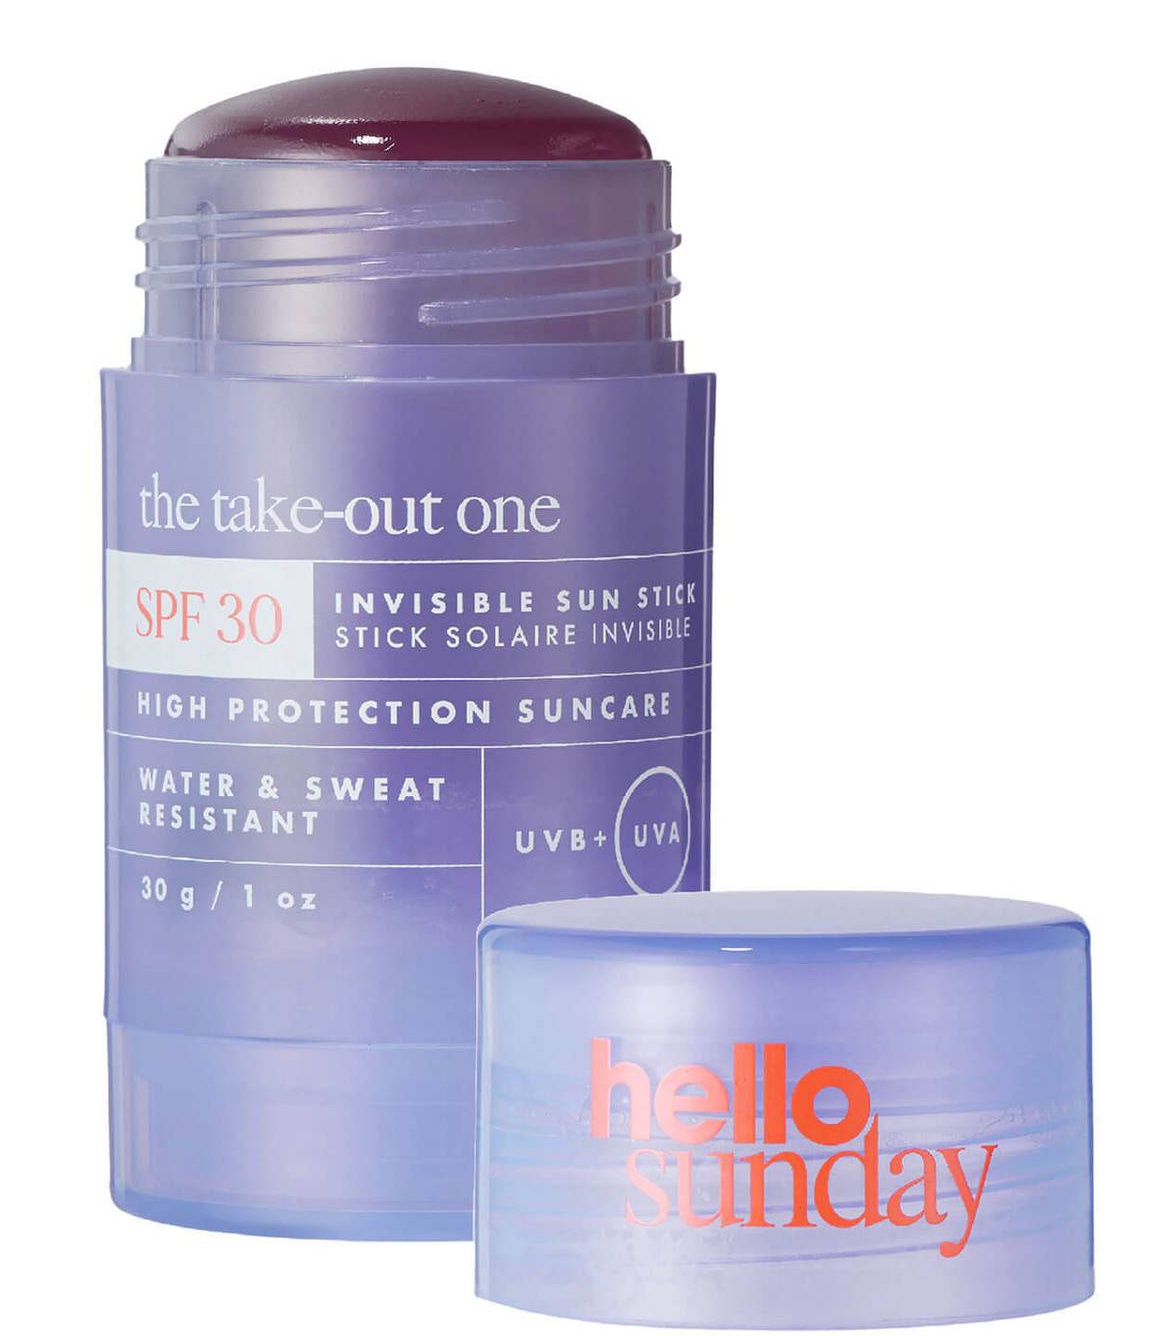 Hello Sunday The Take-out One - Nourishing, On-the-go Sun Stick: SPF30